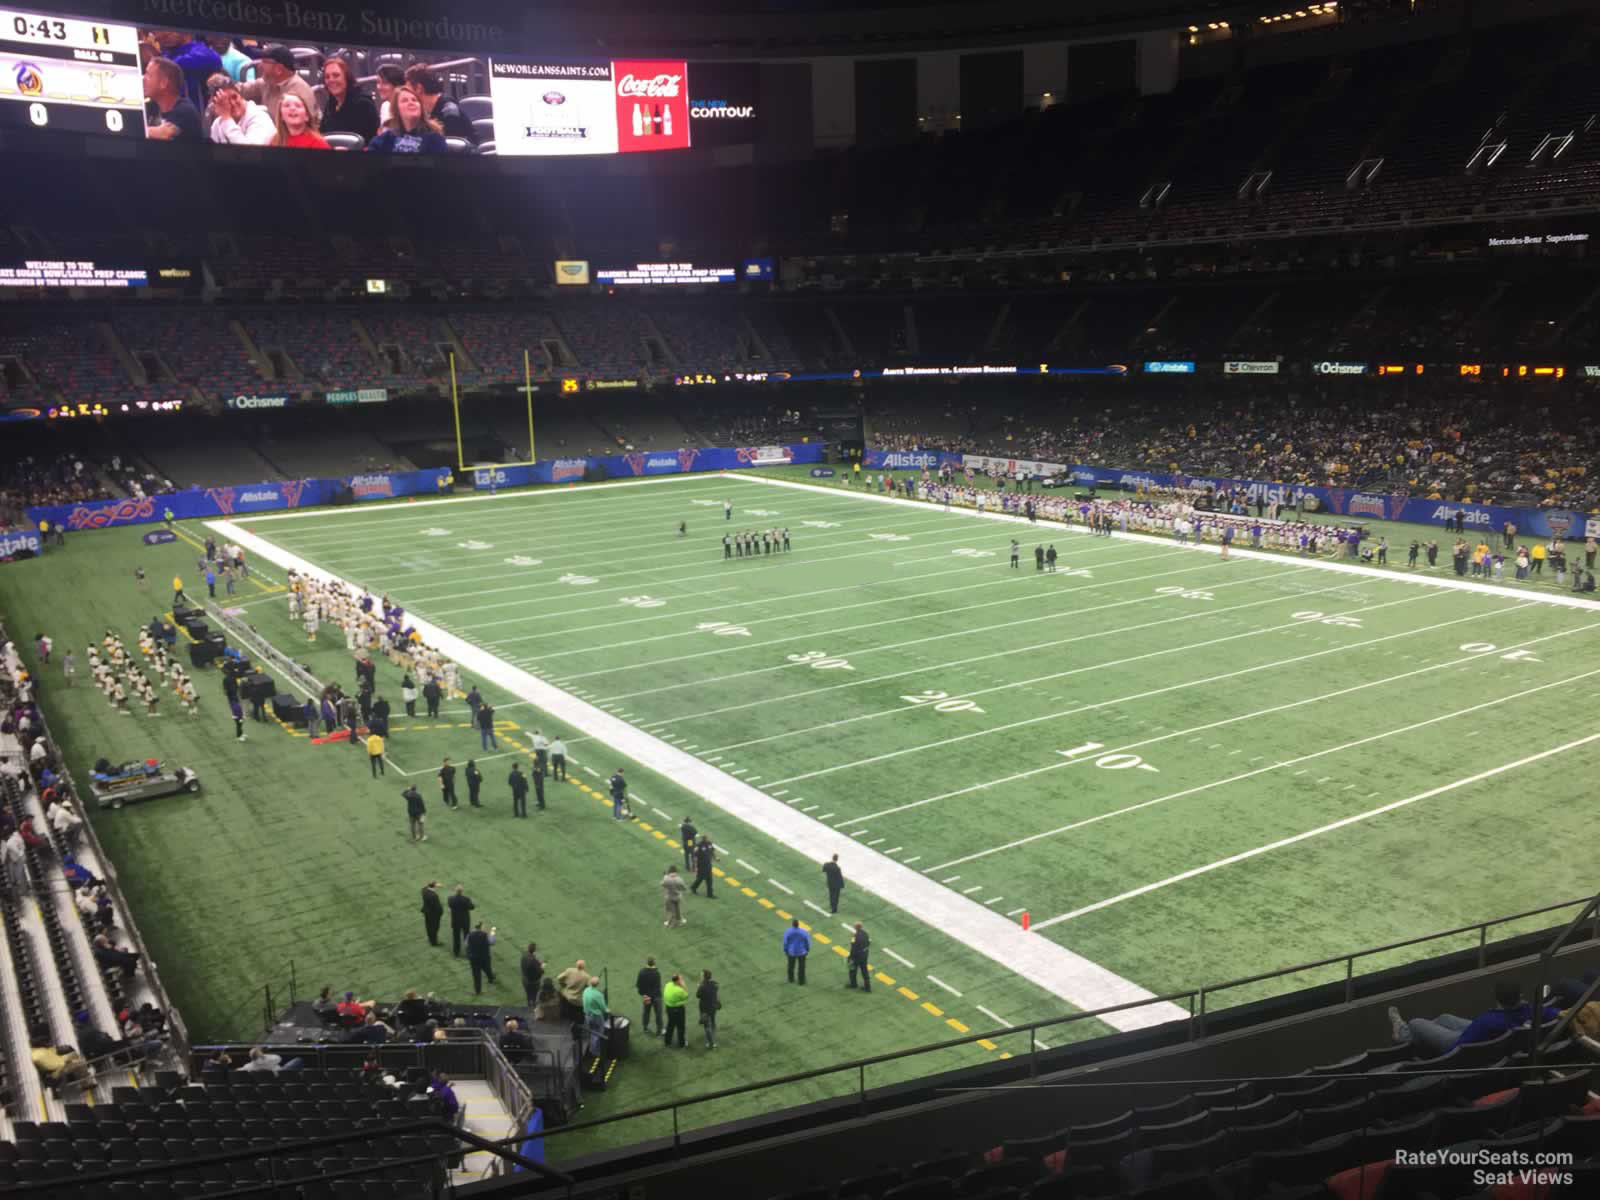 section 305, row 11 seat view  for football - caesars superdome